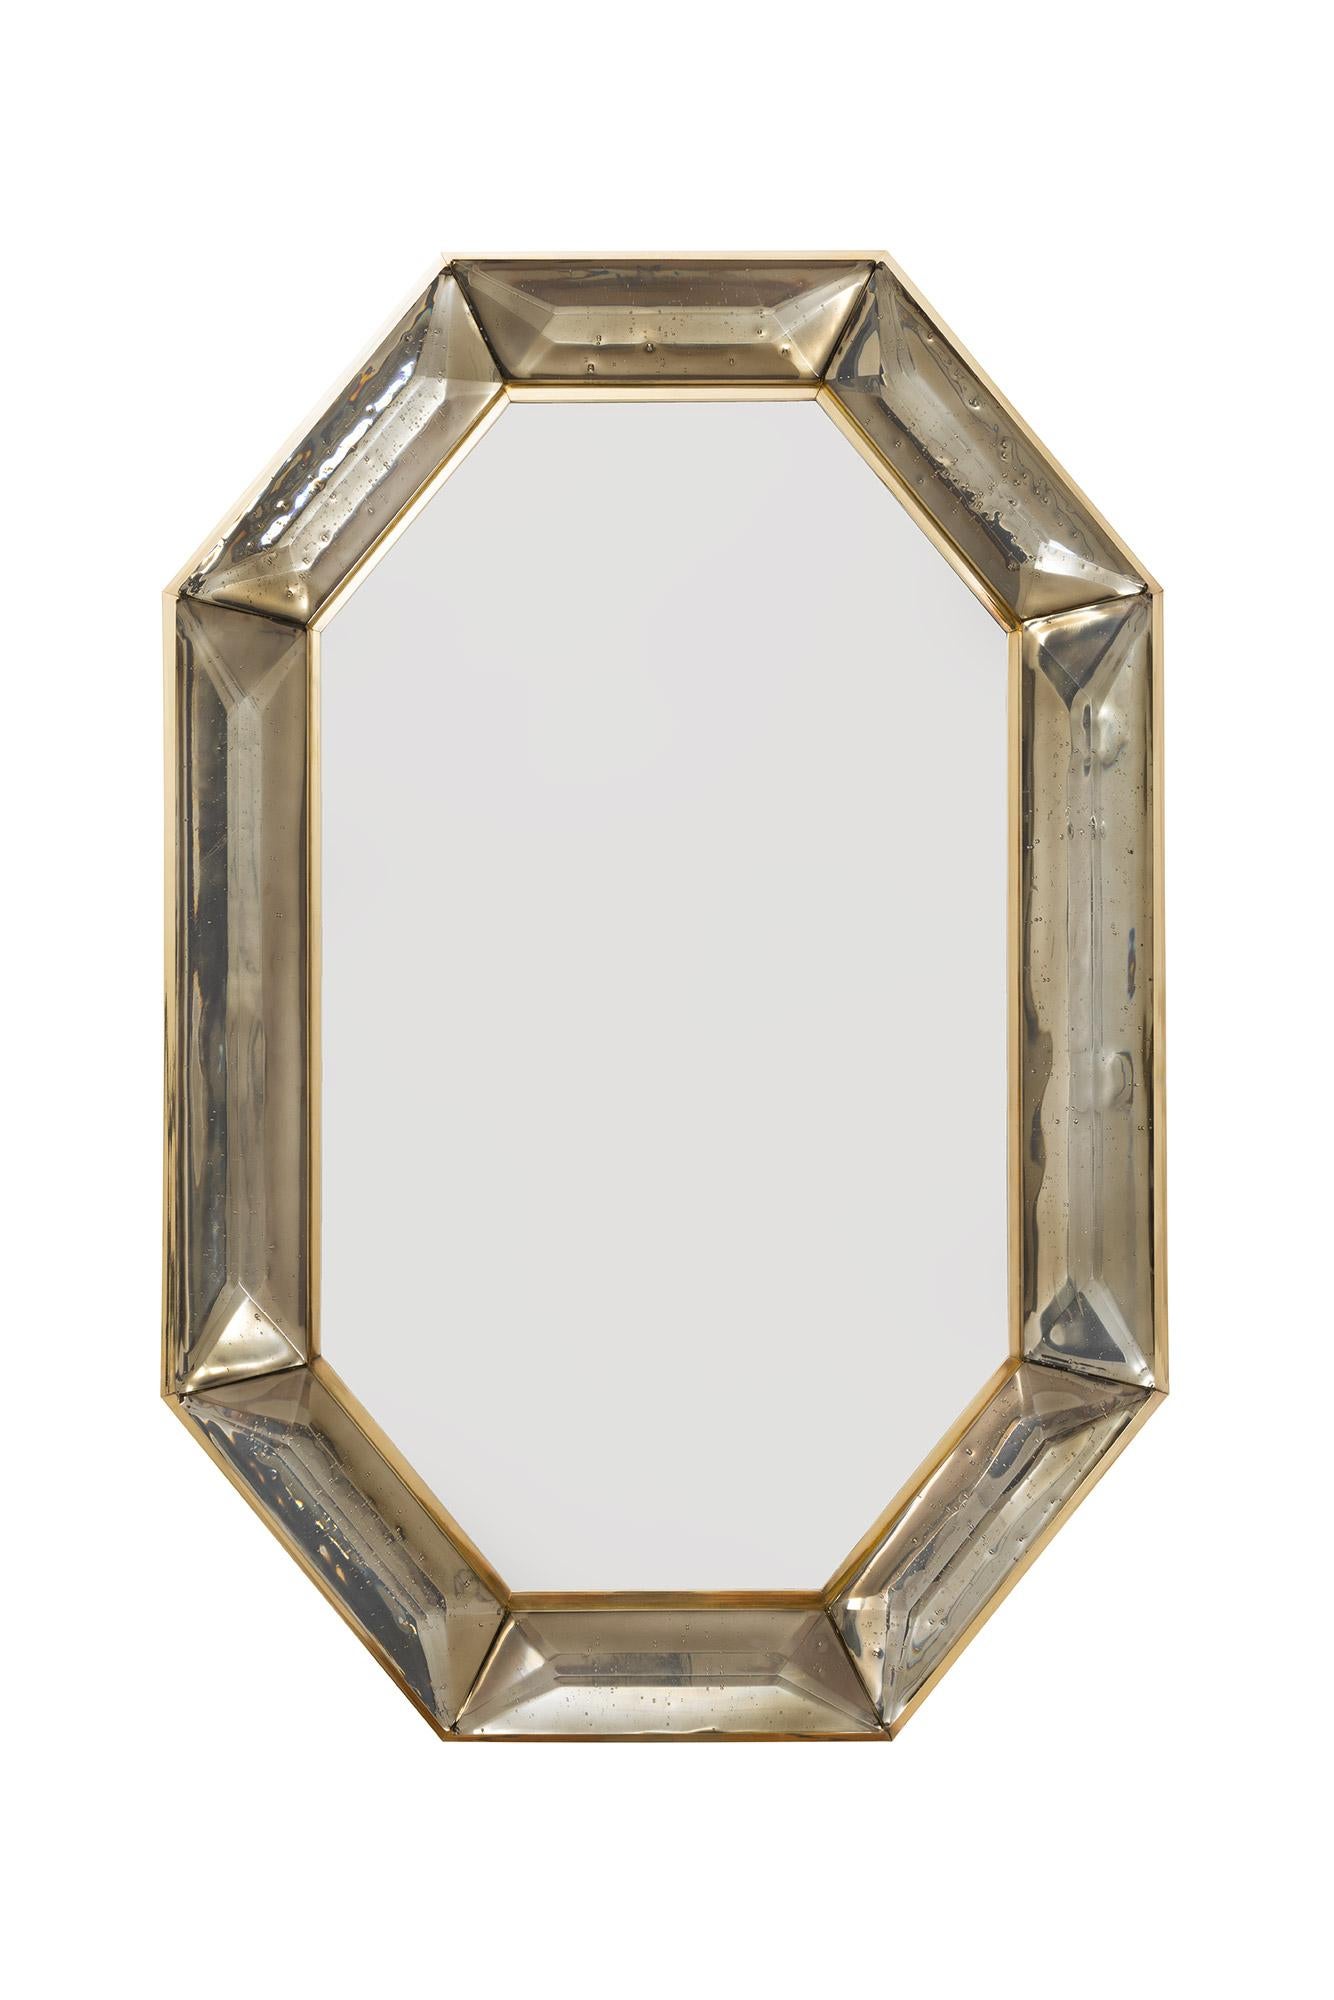 Bespoke octagon smoked Murano glass mirror, in stock
 Vivid and intense smoked or bronze glass block with naturally occurring air inclusions throughout 
 Highly polished faceted pattern
 Brass gallery all around
 Each mirror is a unique luxury